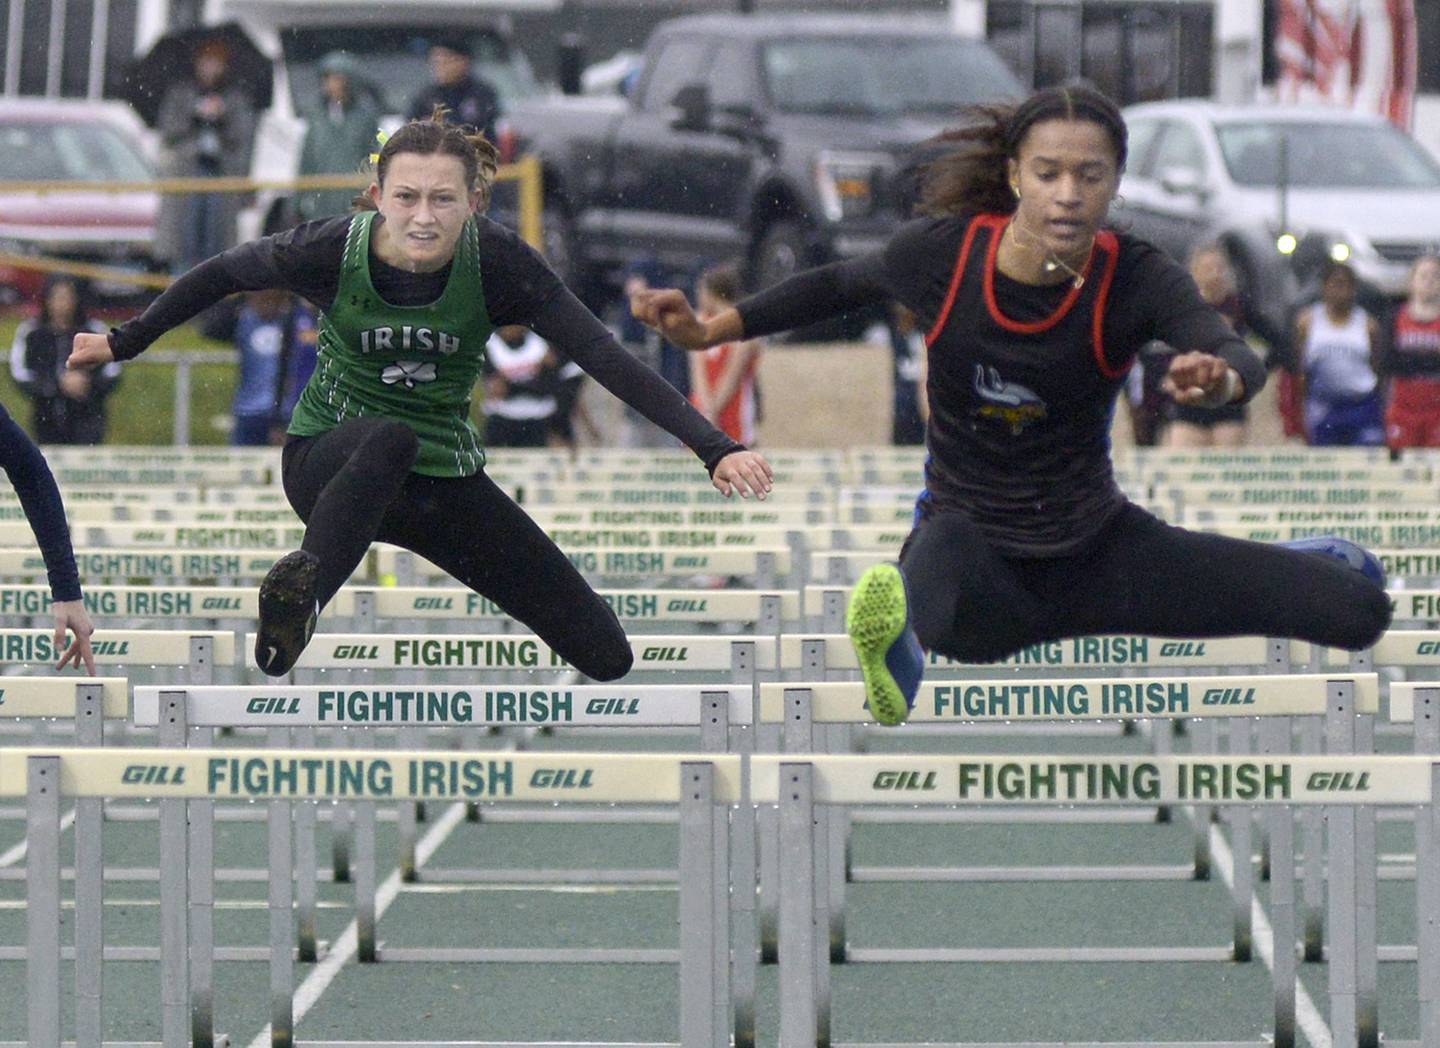 Seneca’s Lilly Pfeifer and Newark’s Kiara Wesseh compete in the 100-meter hurdles Thursday’s sectional at Seneca.